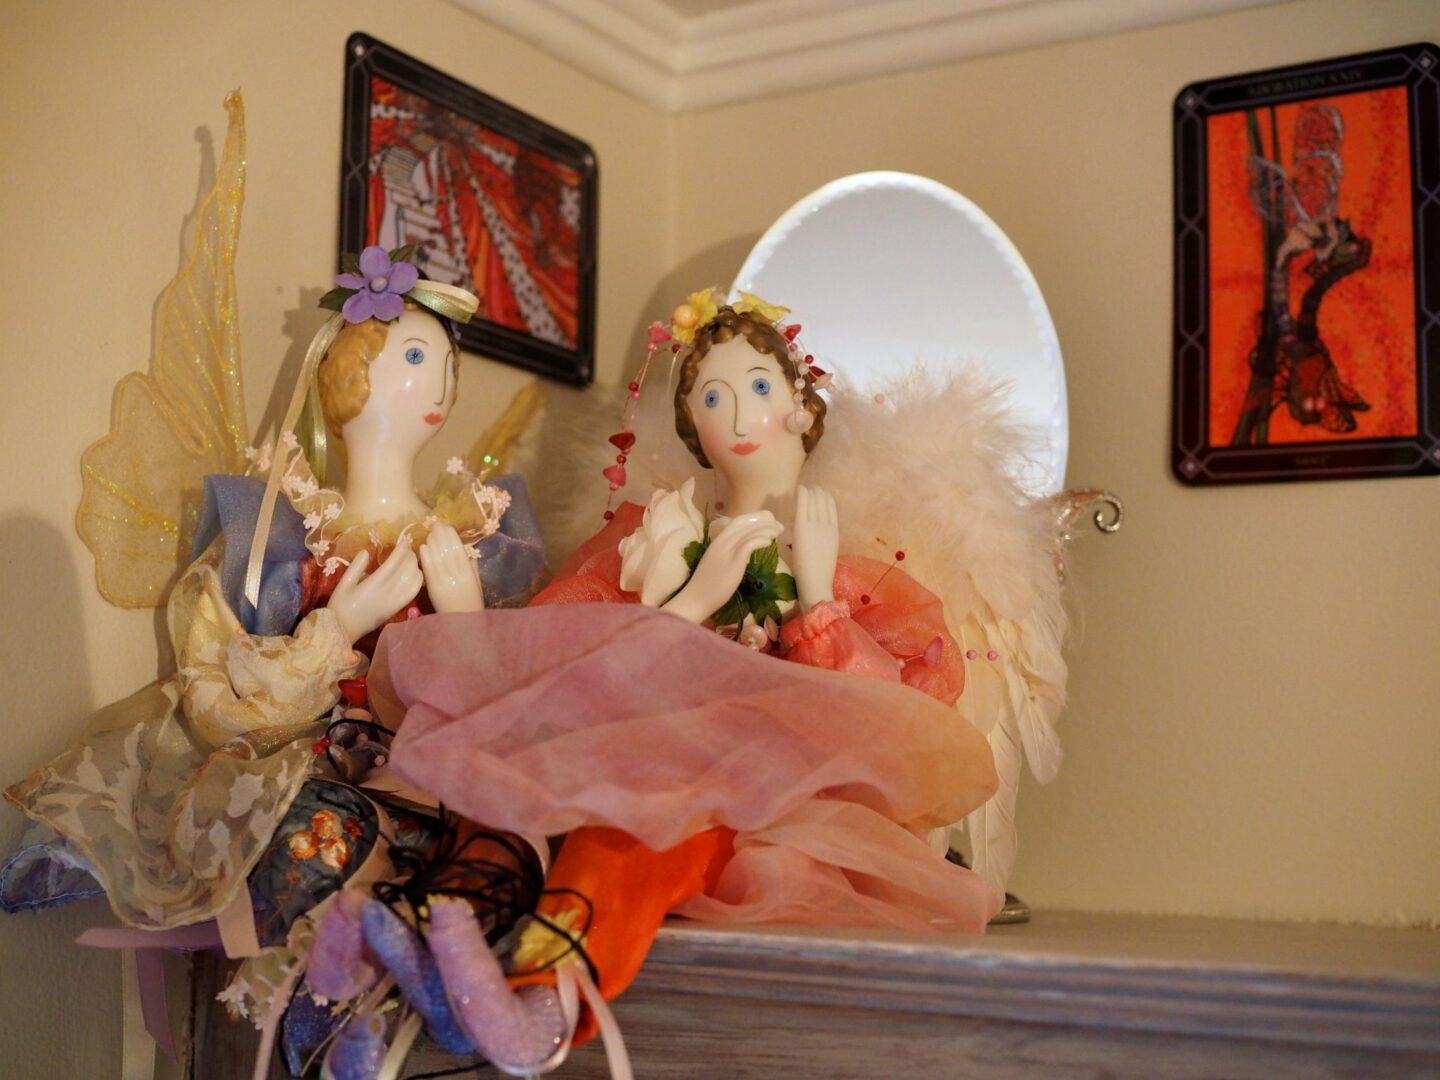 Two dolls are sitting on a table in front of a mirror.